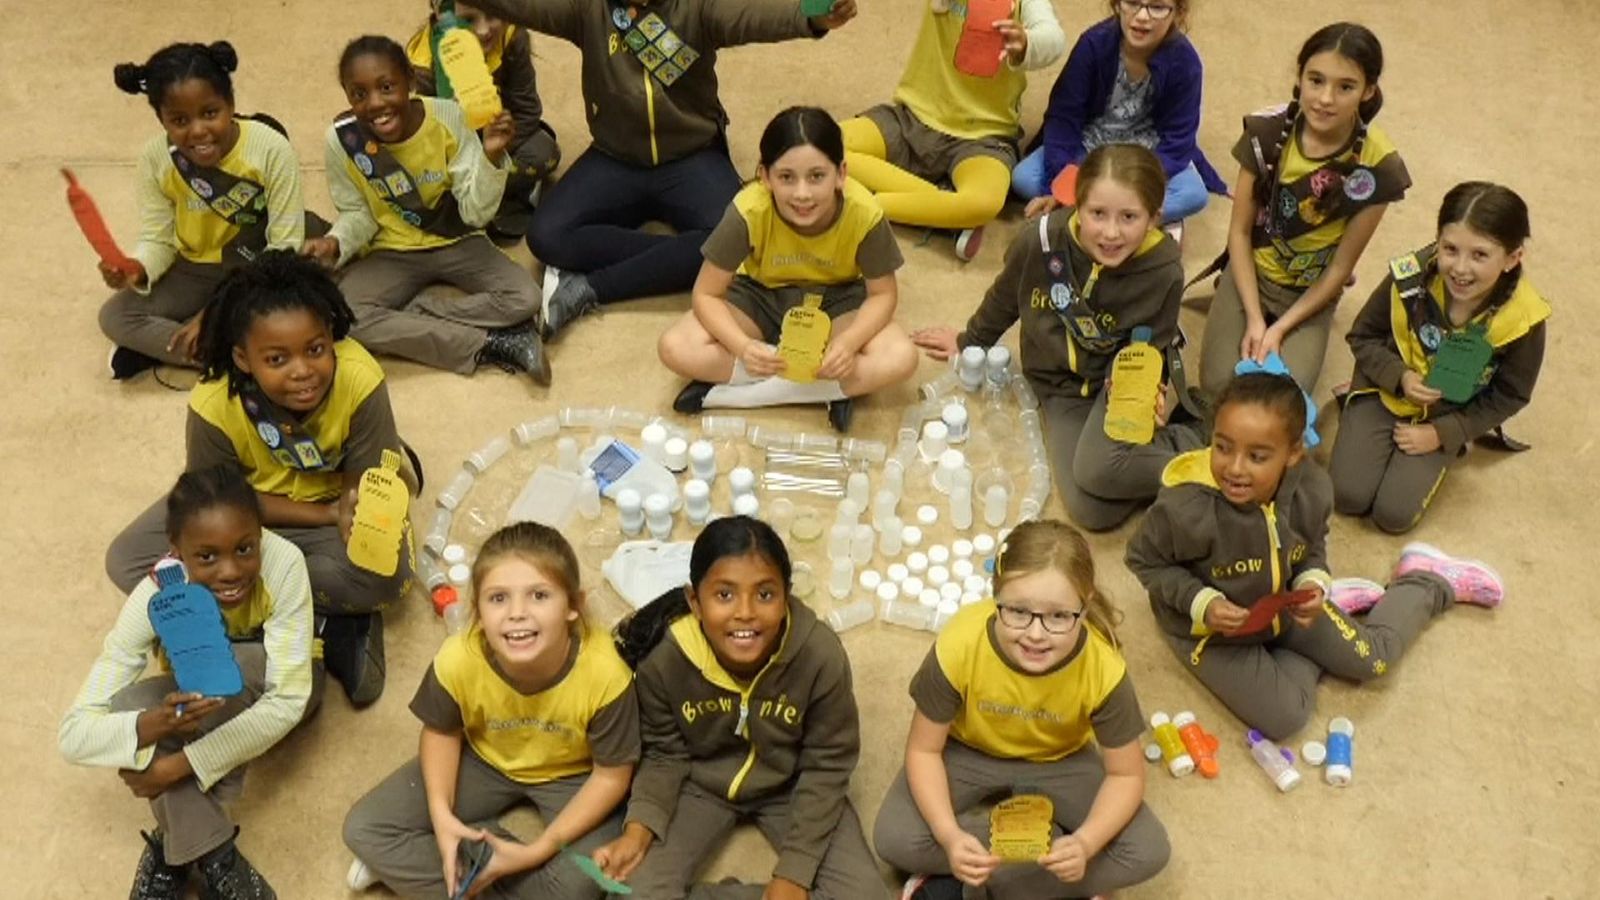 Girl Guides pledge to take action on climate change with 'plastic promise' - Sky News